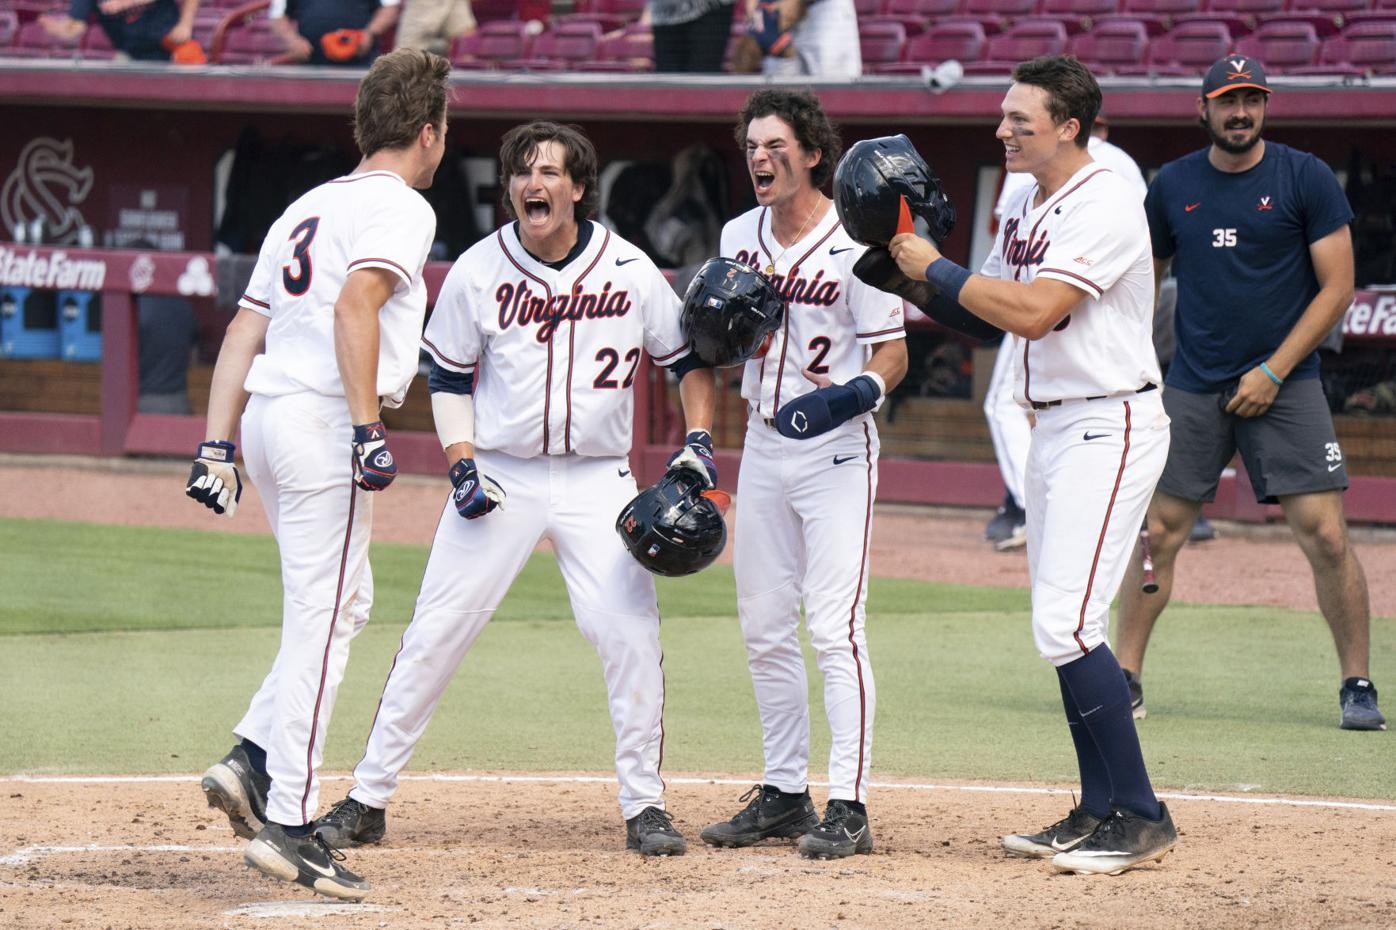 College World Series roundup: Arizona heading to CWS finals after